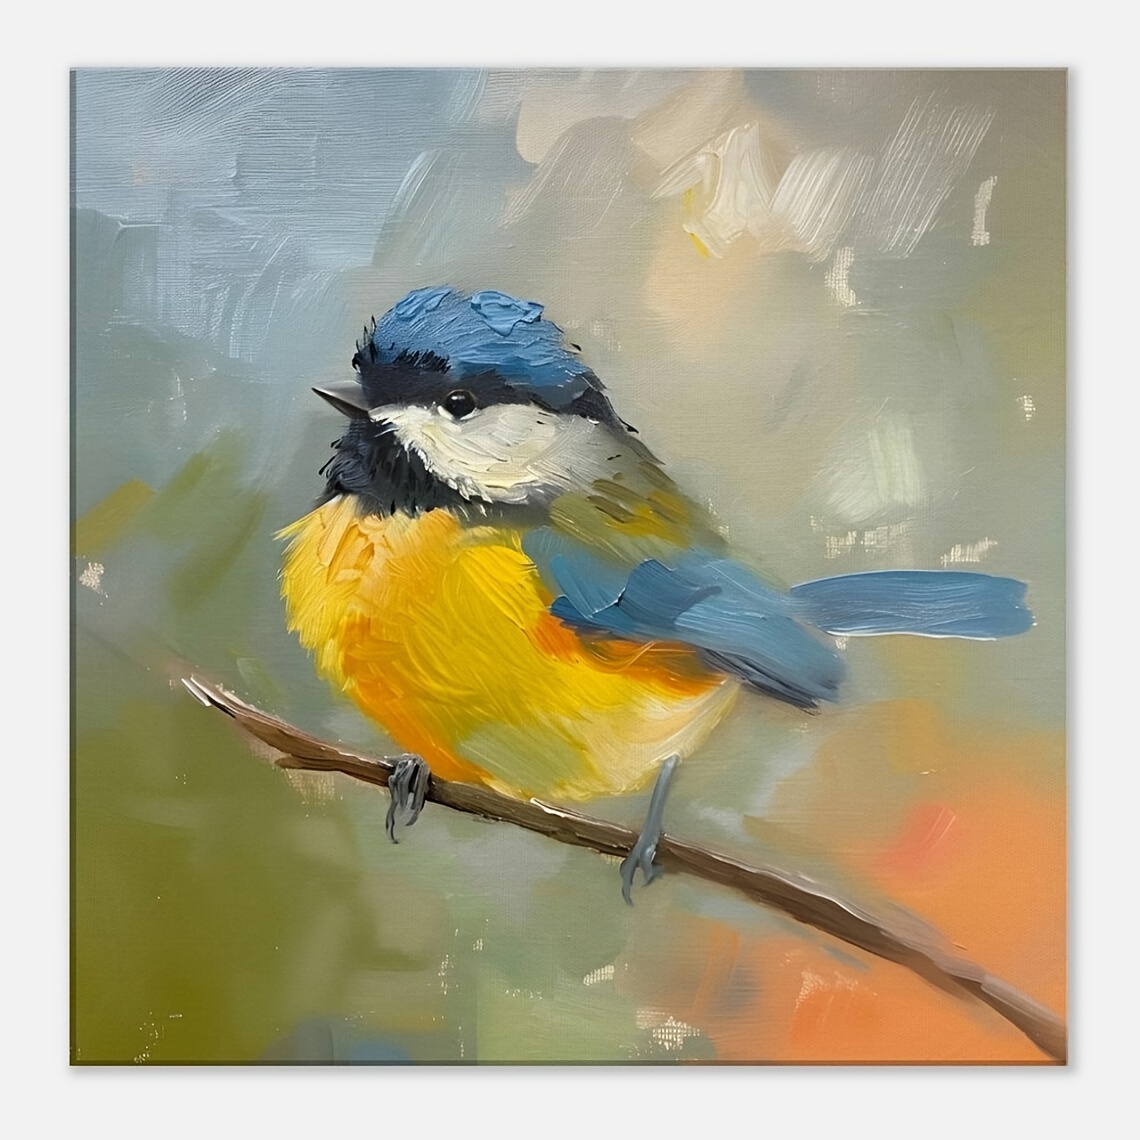 

12x12 Inch Unframed Colorful Bird On Branch Art Canvas Print - Perfect For Home Decor: Living Room, Bedroom, Office, Bar, Coffee Shop, Or Cafe